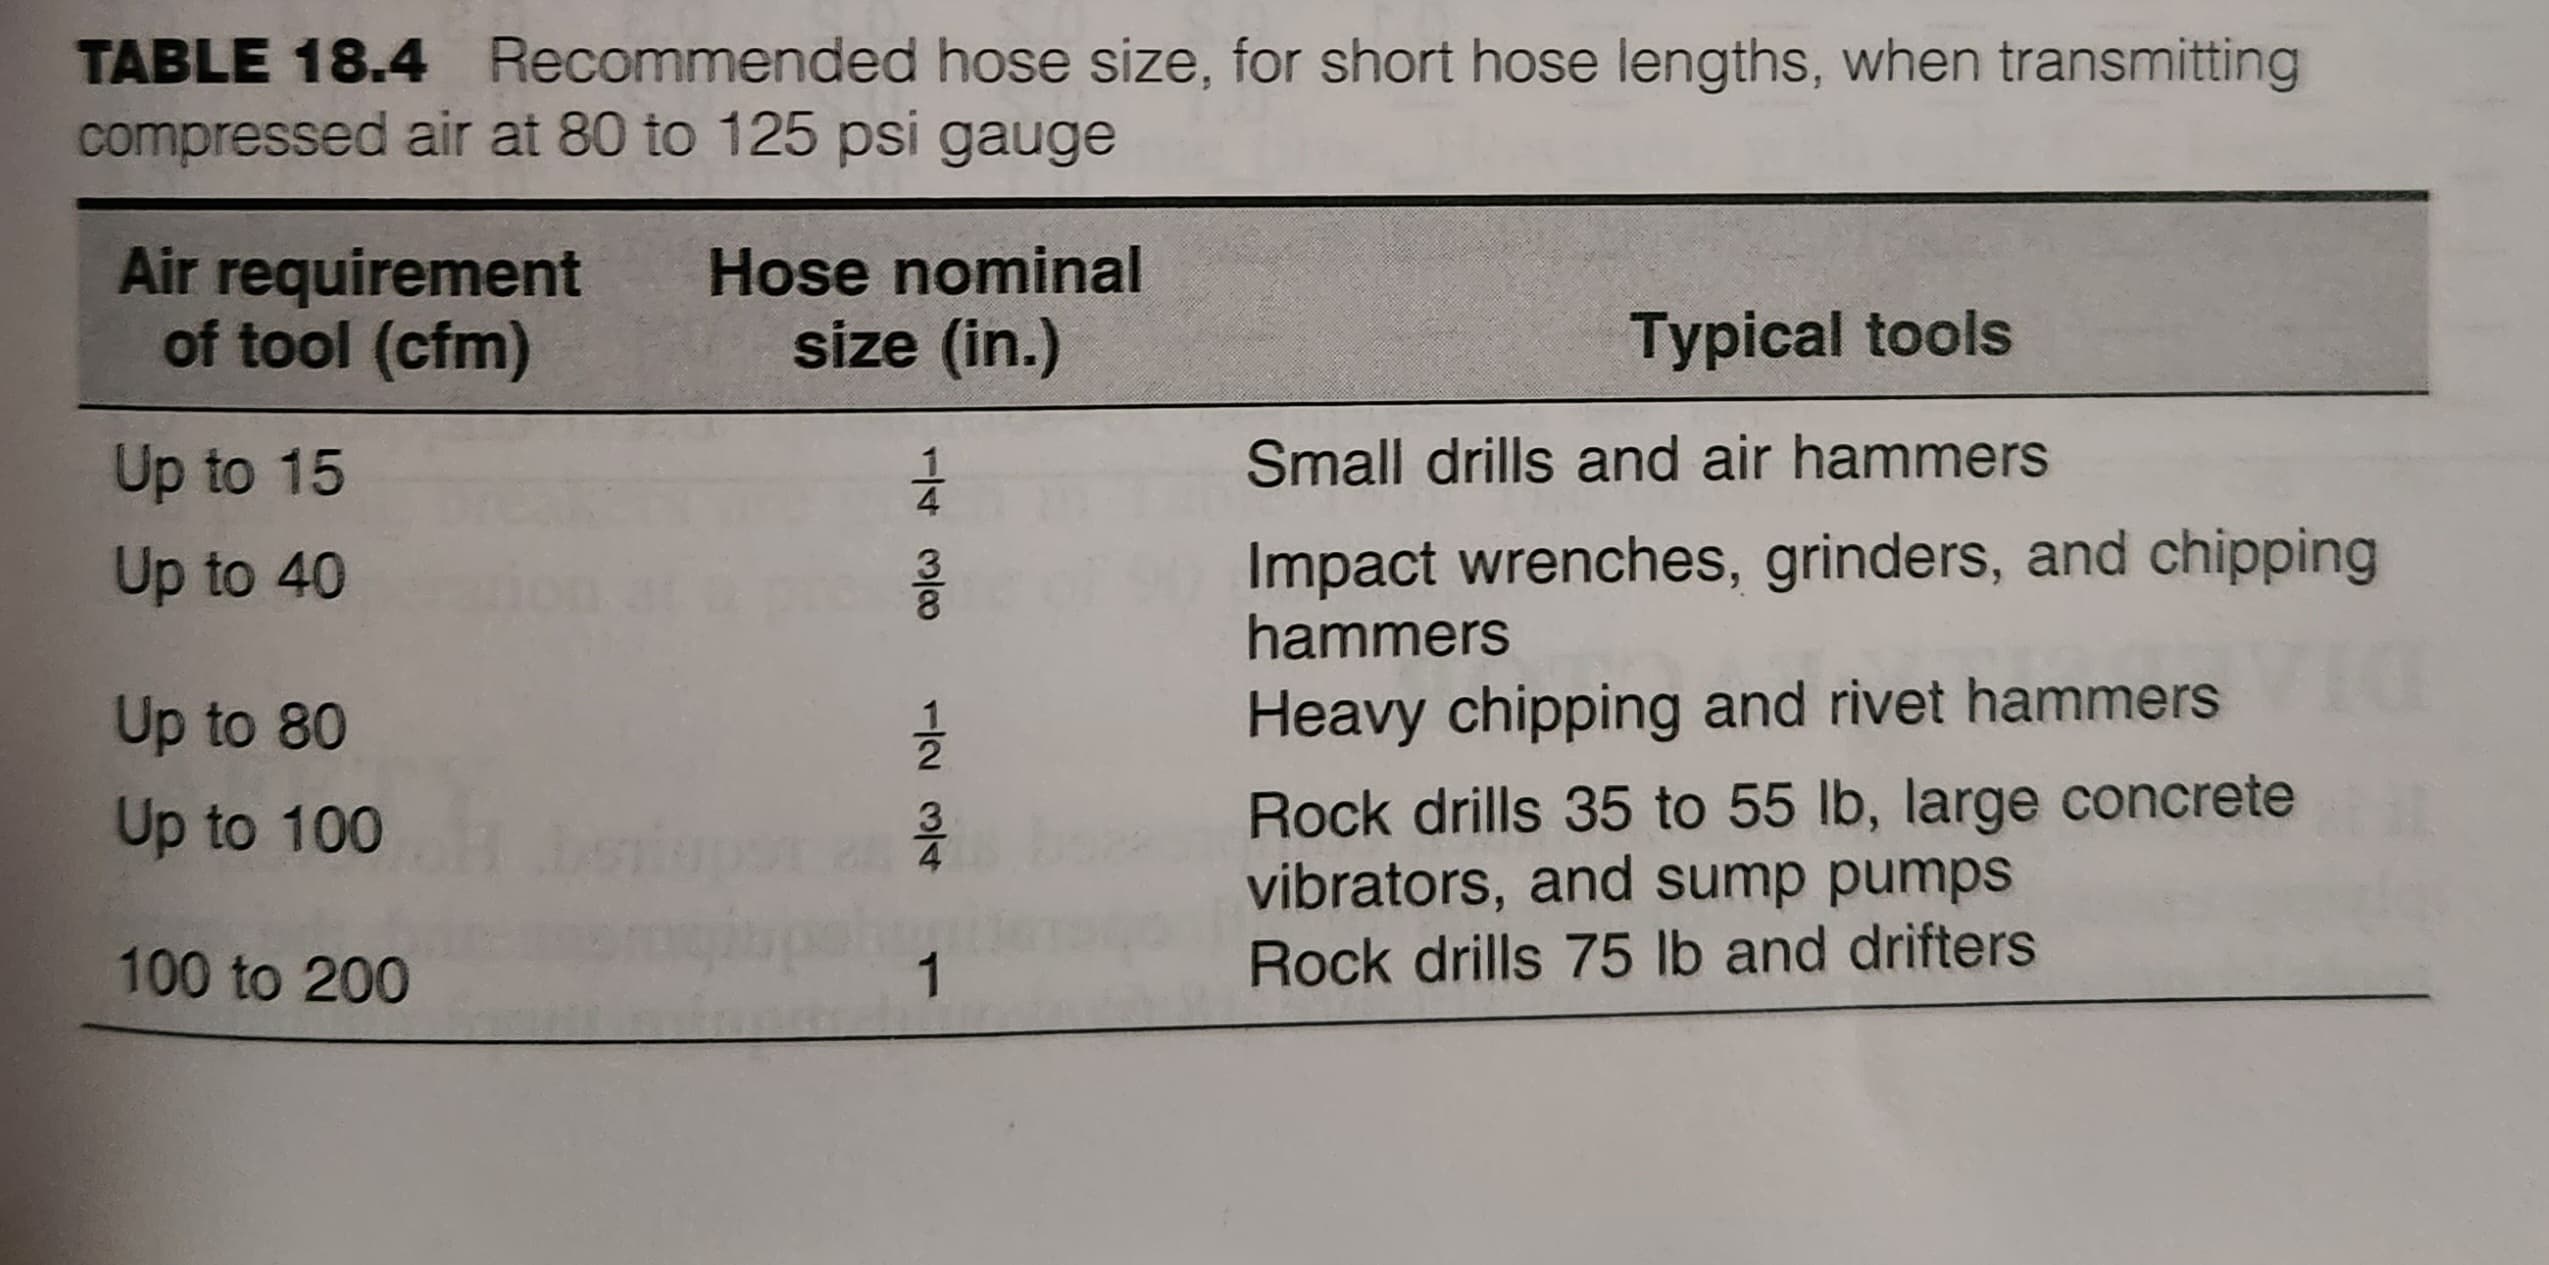 TABLE 18.4 Recommended hose size, for short hose lengths, when transmitting
compressed air at 80 to 125 psi gauge
Air requirement
of tool (cfm)
Up to 15
Up to 40
Up to 80
Up to 100
100 to 200
Hose nominal
size (in.)
1438
1234
1
Typical tools
Small drills and air hammers
Impact wrenches, grinders, and chipping
hammers
Heavy chipping and rivet hammers
Rock drills 35 to 55 lb, large concrete
vibrators, and sump pumps
Rock drills 75 lb and drifters